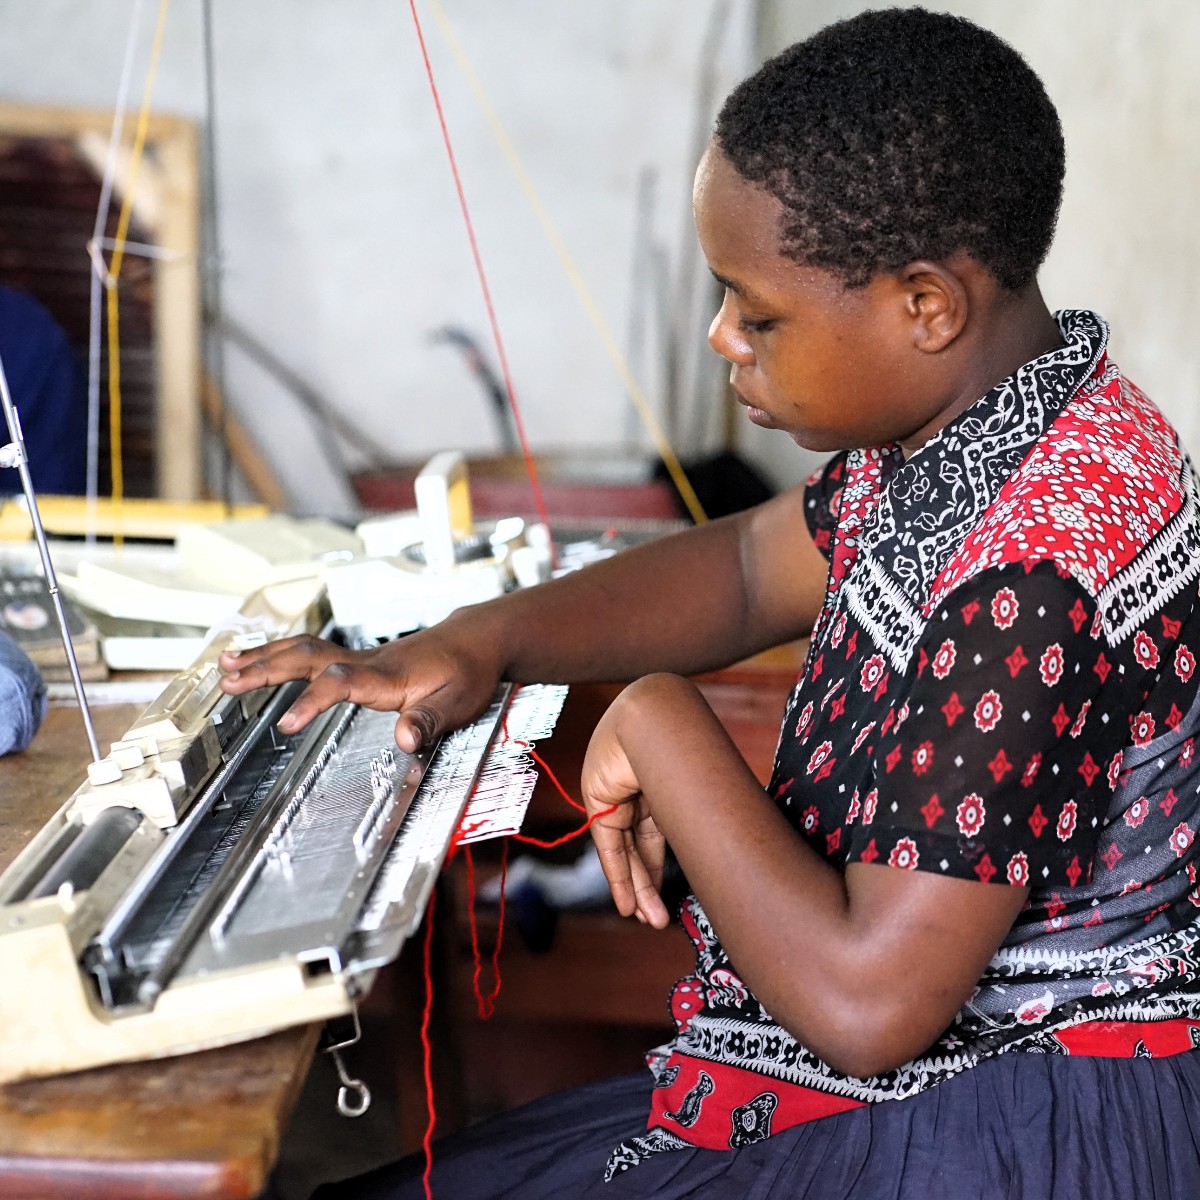 In #Uganda, we've provided vocational skills, startup capital & business revitalisation to young people in Nakivale & Oruchinga refugee settlements. This will empower them with the tools & resources to build sustainable livelihoods & contribute to their communities. @hiltonfound.